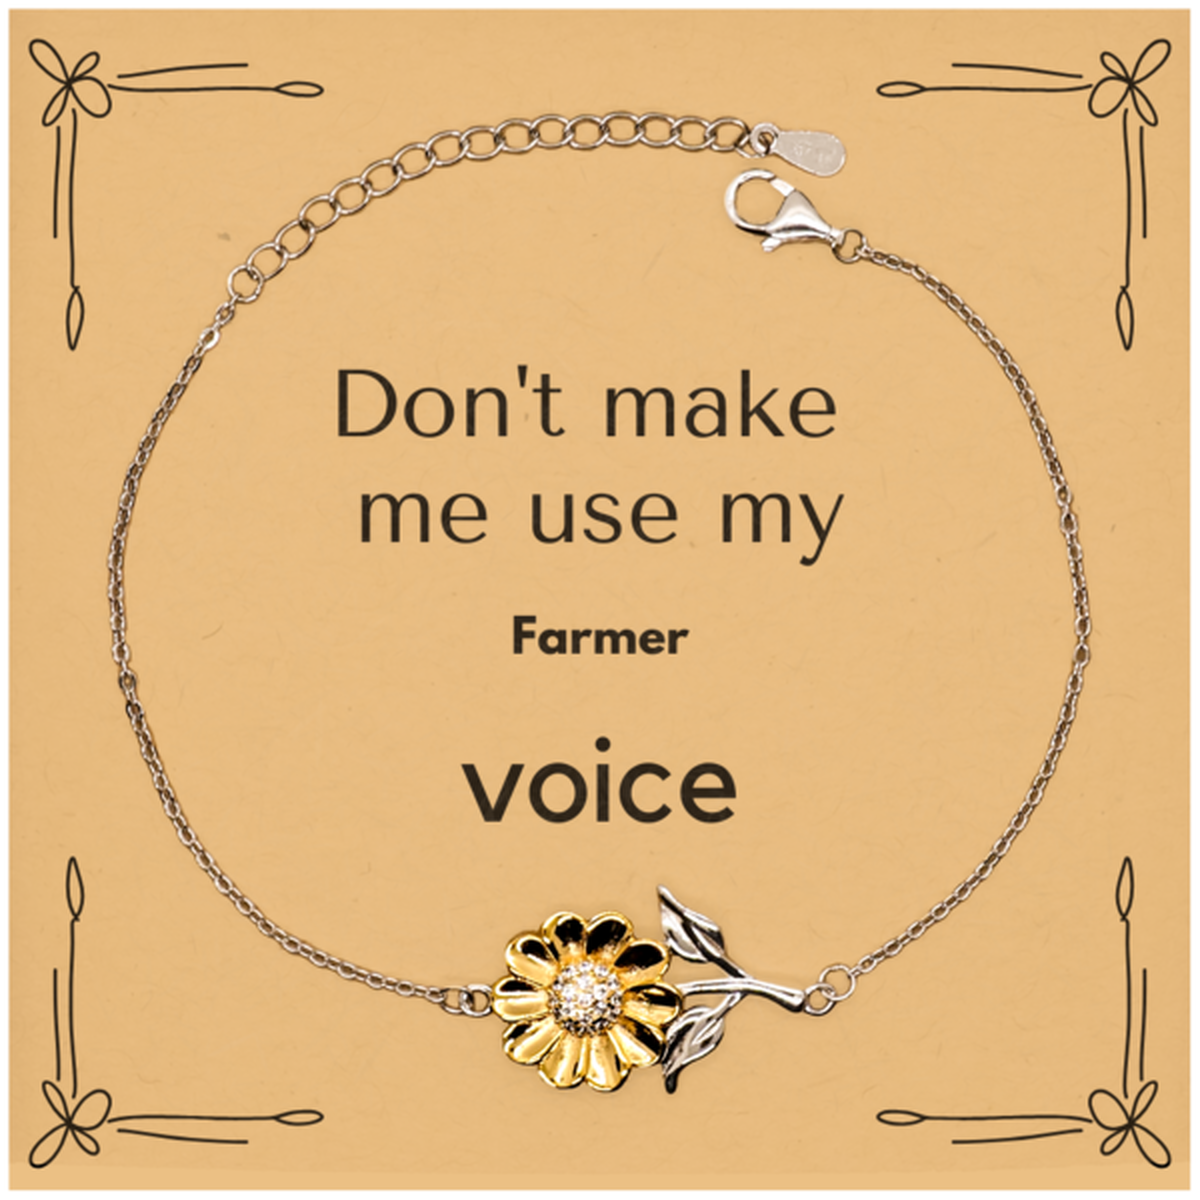 Don't make me use my Farmer voice, Sarcasm Farmer Card Gifts, Christmas Farmer Sunflower Bracelet Birthday Unique Gifts For Farmer Coworkers, Men, Women, Colleague, Friends